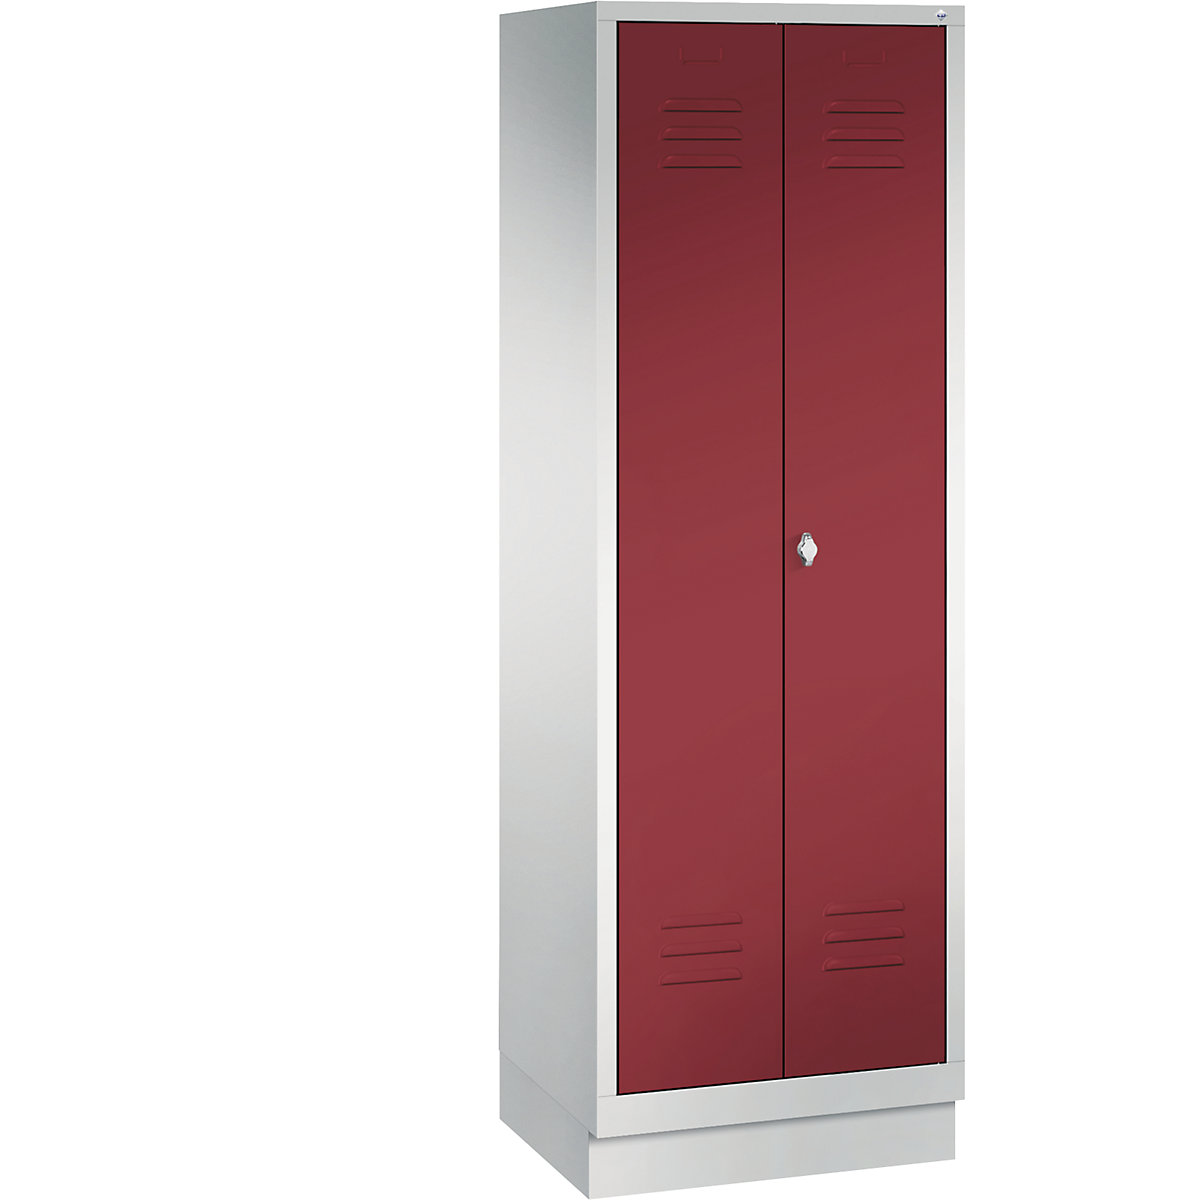 CLASSIC storage cupboard with plinth, doors close in the middle – C+P, 2 compartments, compartment width 300 mm, light grey / ruby red-6